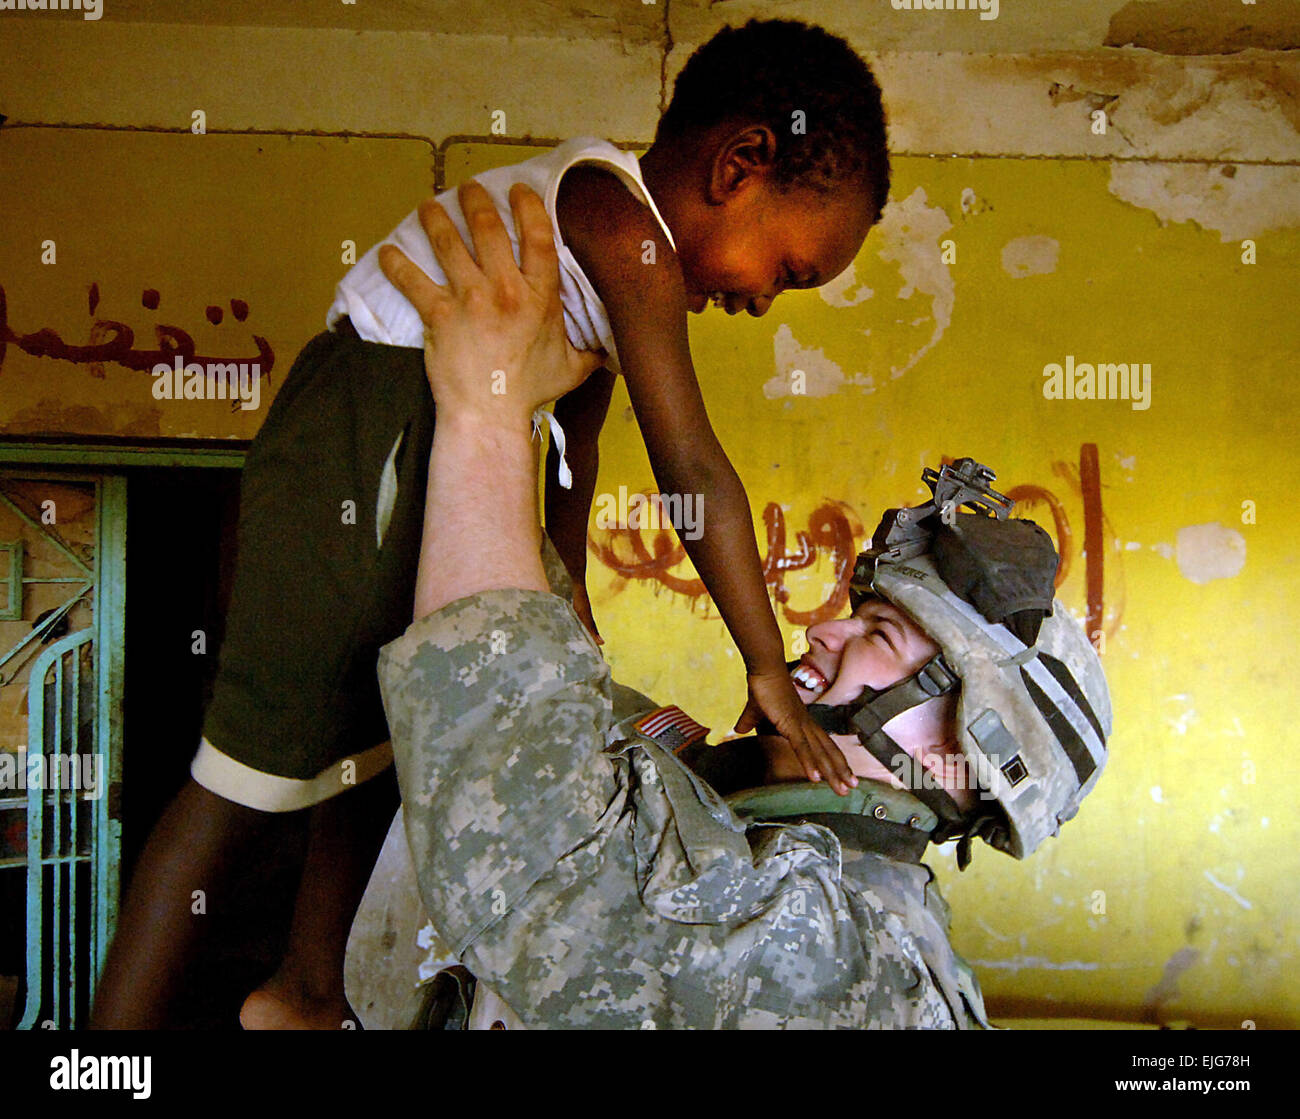 Cpl. David Stigers, from Bravo Company, 2nd Battalion, 6th Infantry Regiment, attached to Task Force 1st Battalion, 35th Armored Regiment, 2nd Brigade Combat Team, 1st Armored Division, plays with a young Iraqi boy while his team questions his mother in order to fill out a census form in Tameem, Iraq, Aug. 7, 2006.  Tech. Sgt. Jeremy T. Lock.      . Stock Photo